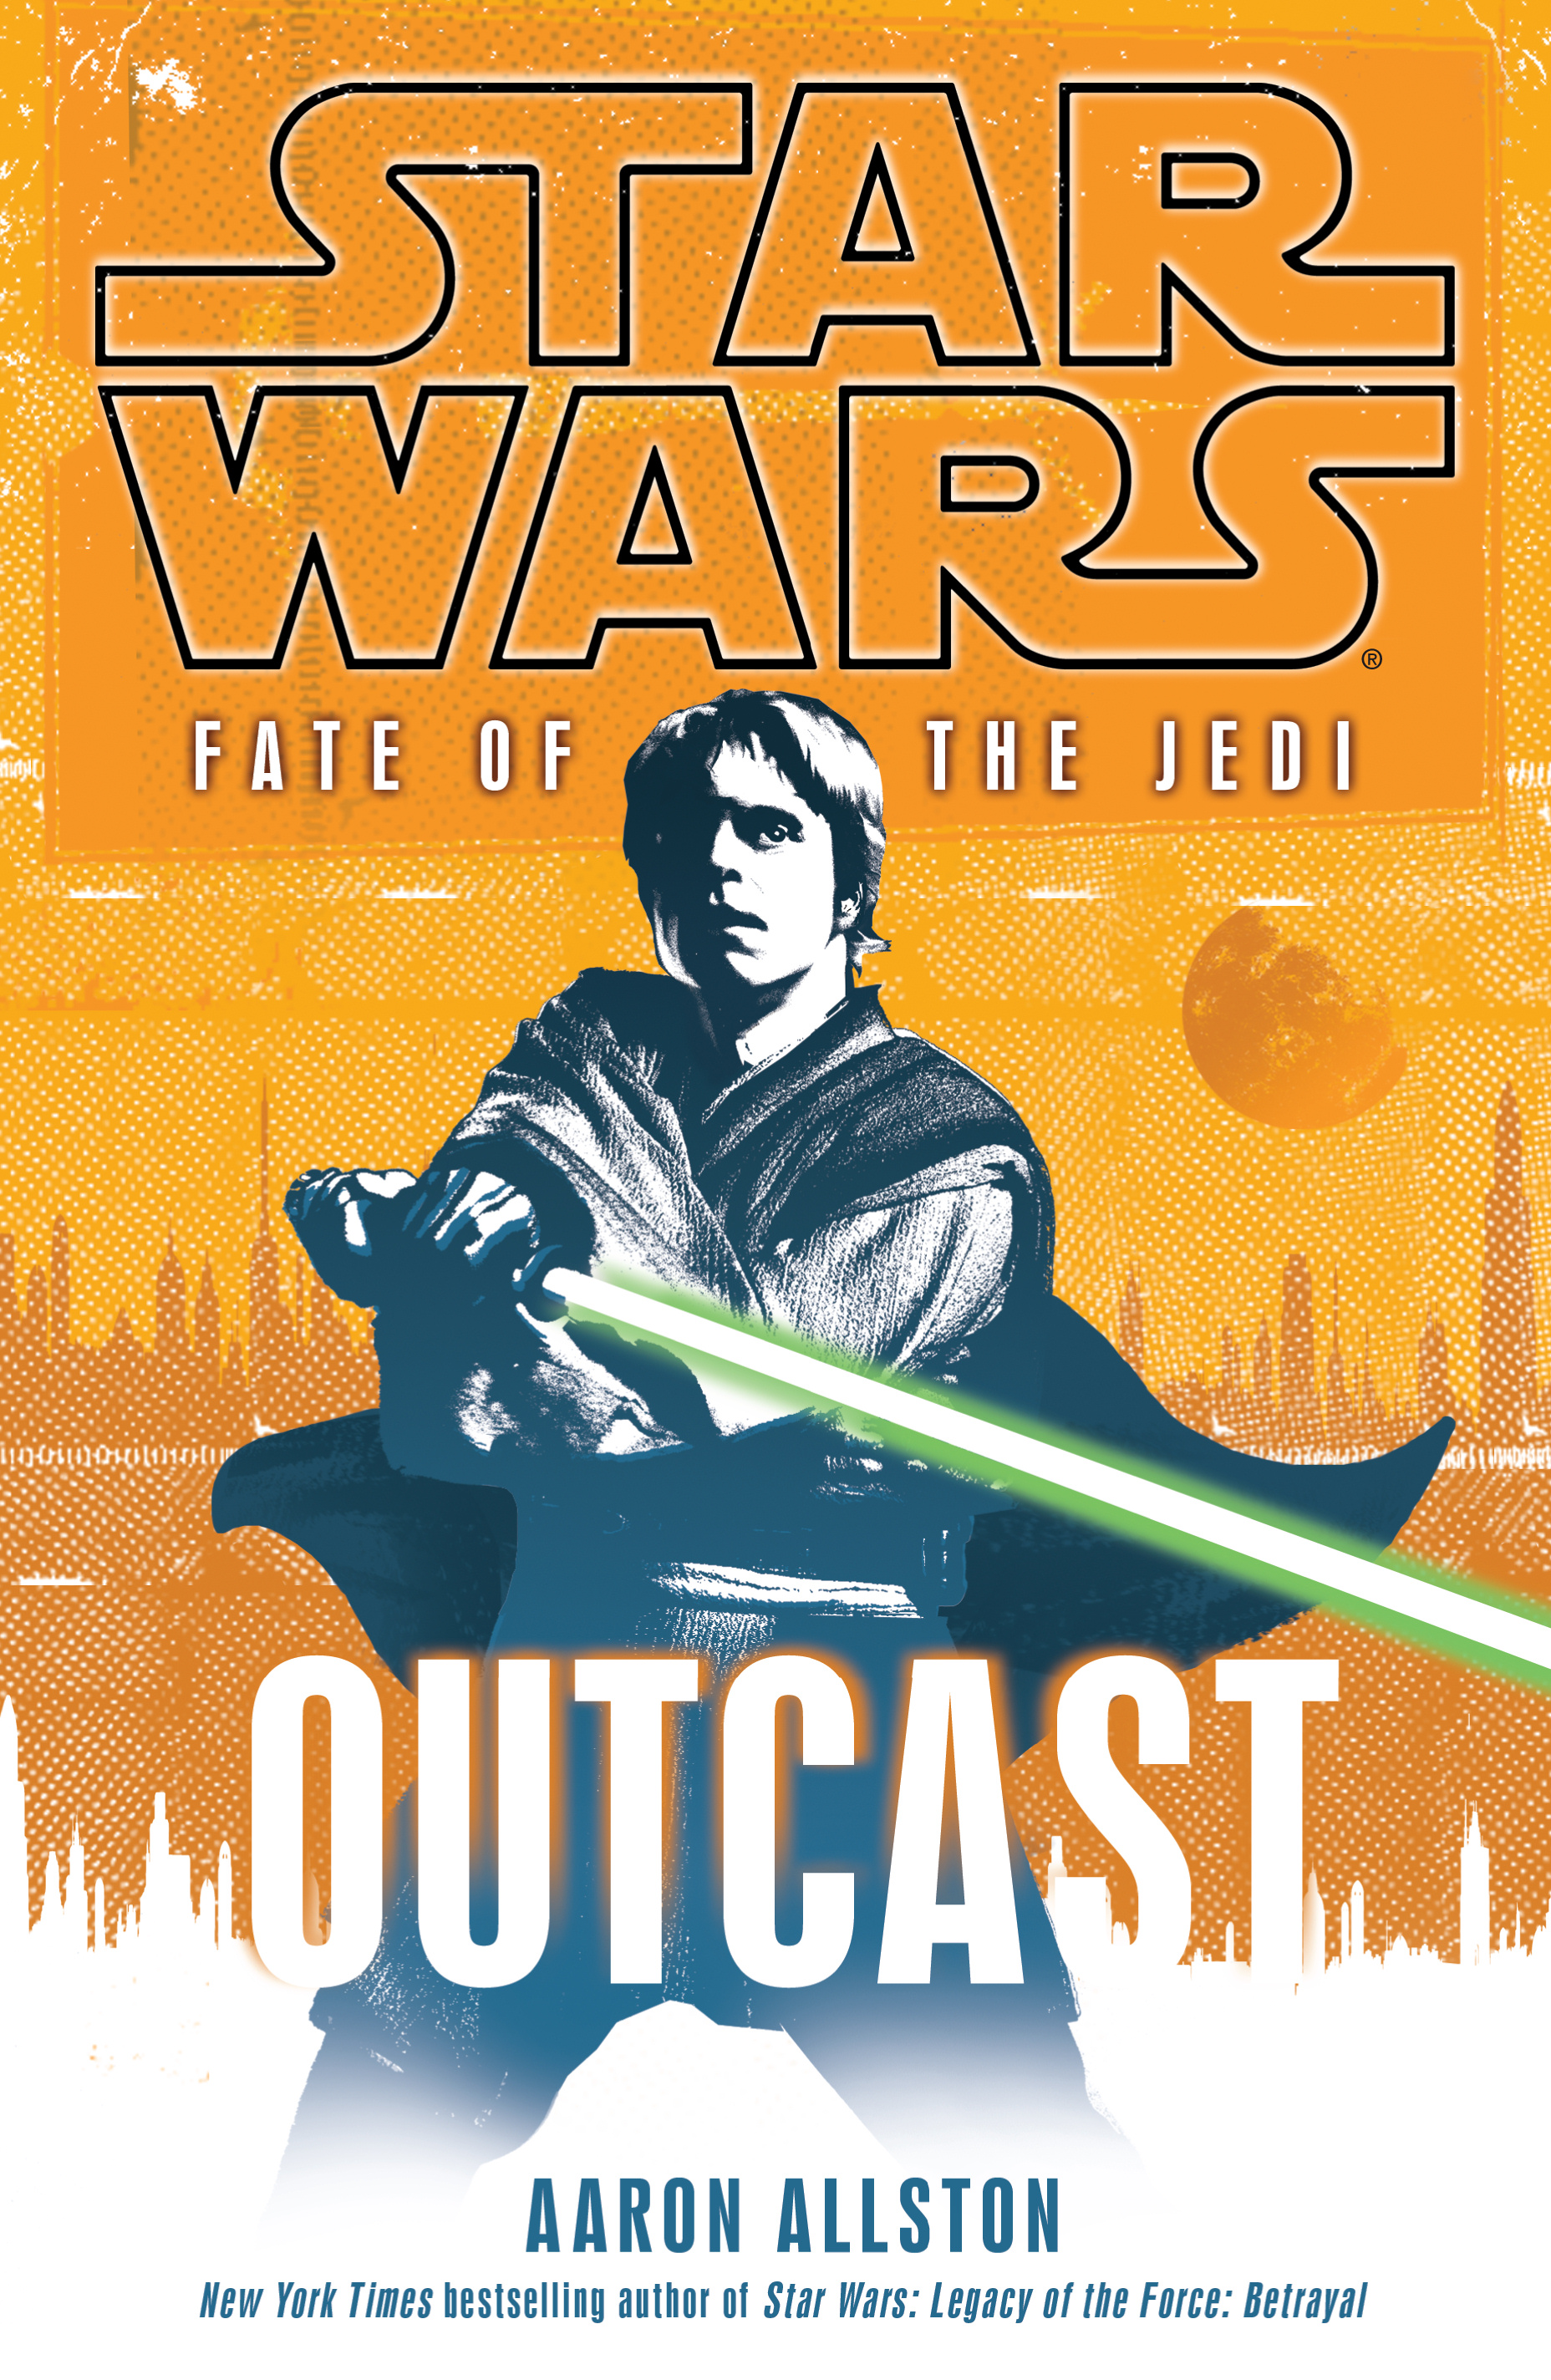 https://static.wikia.nocookie.net/starwars/images/5/51/Outcast_cover.jpg/revision/latest?cb=20090118231713